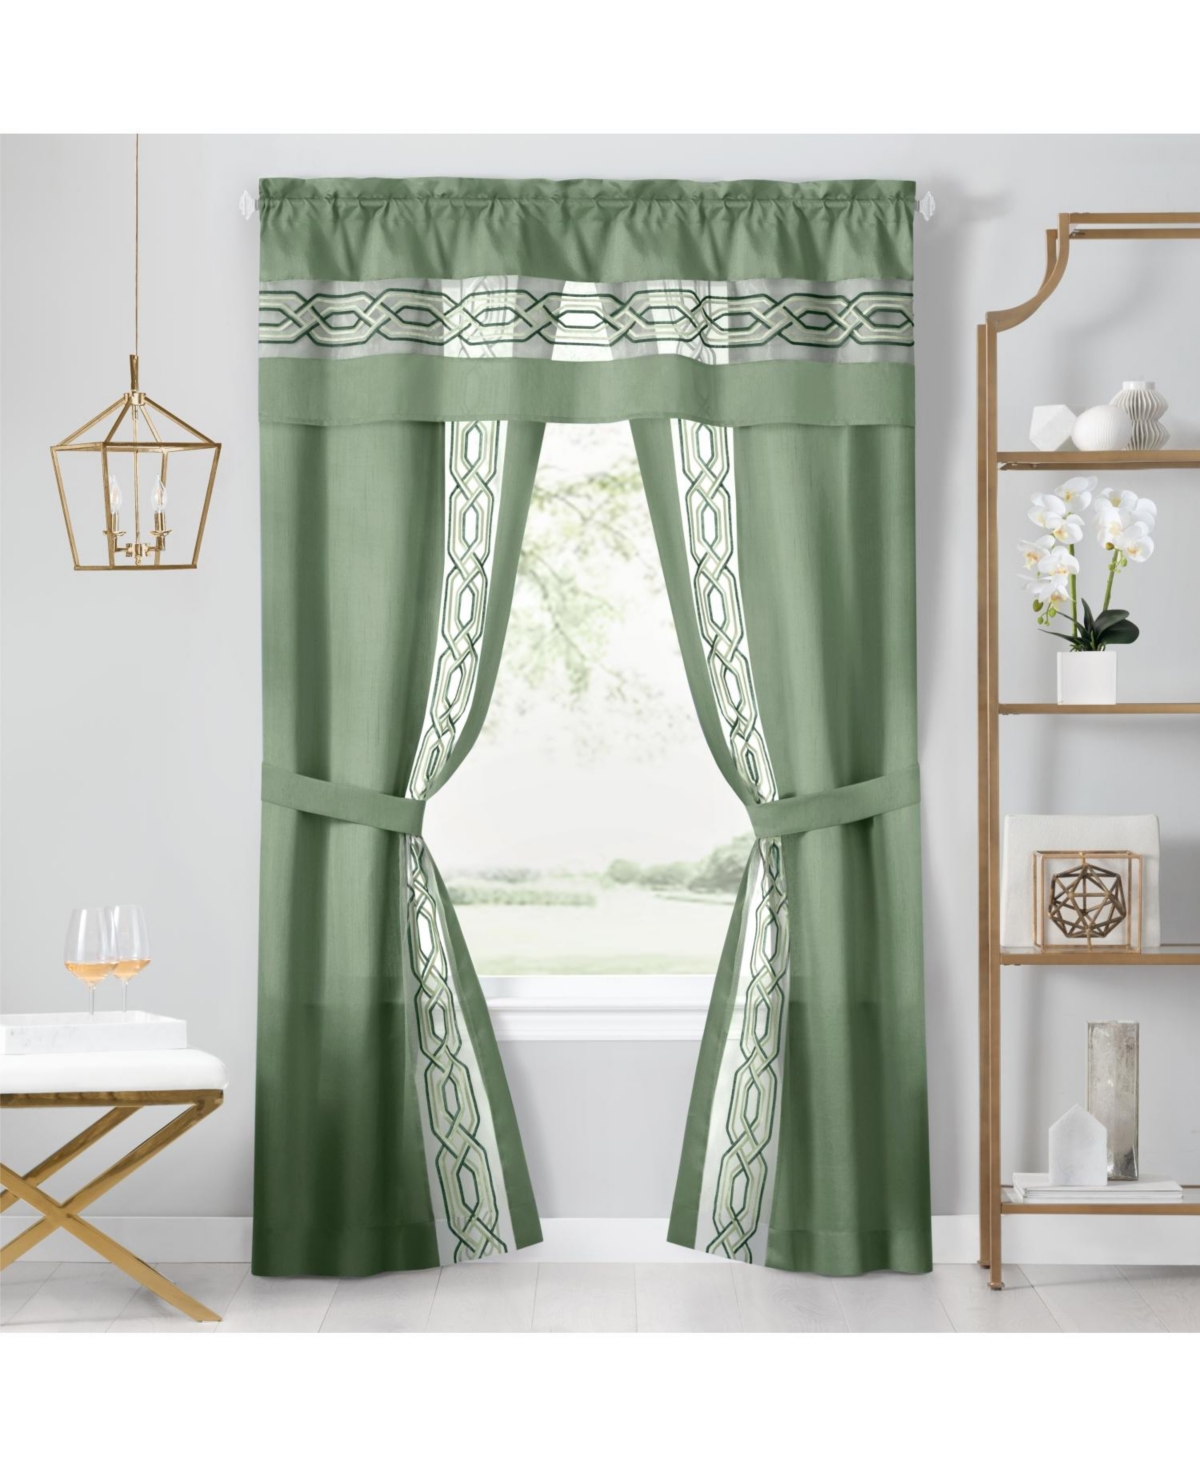 Pacifico 5 Piece Rod Pocket All In One Attached Semi Sheer Window Curtain Panels & Valance Set - Sage